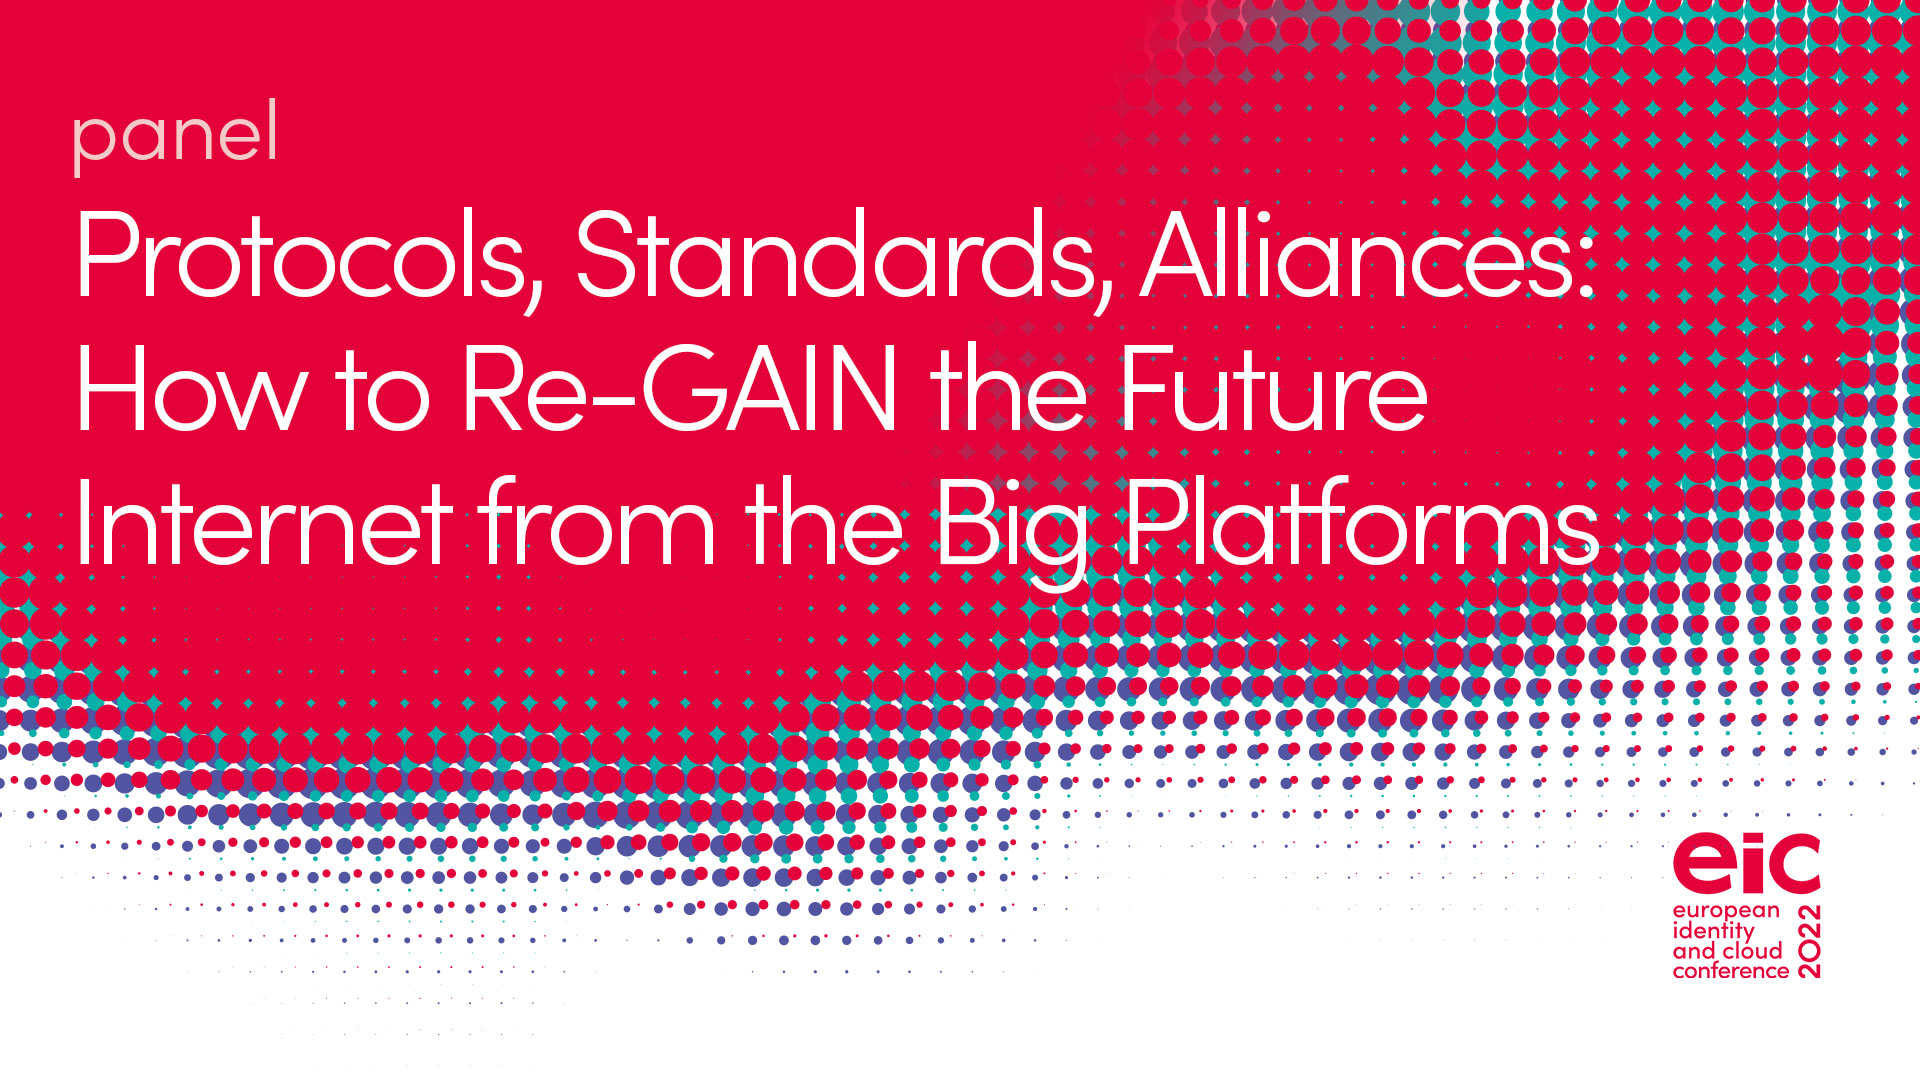 Panel | Protocols, Standards, Alliances: How to Re-GAIN the Future Internet from the Big Platforms